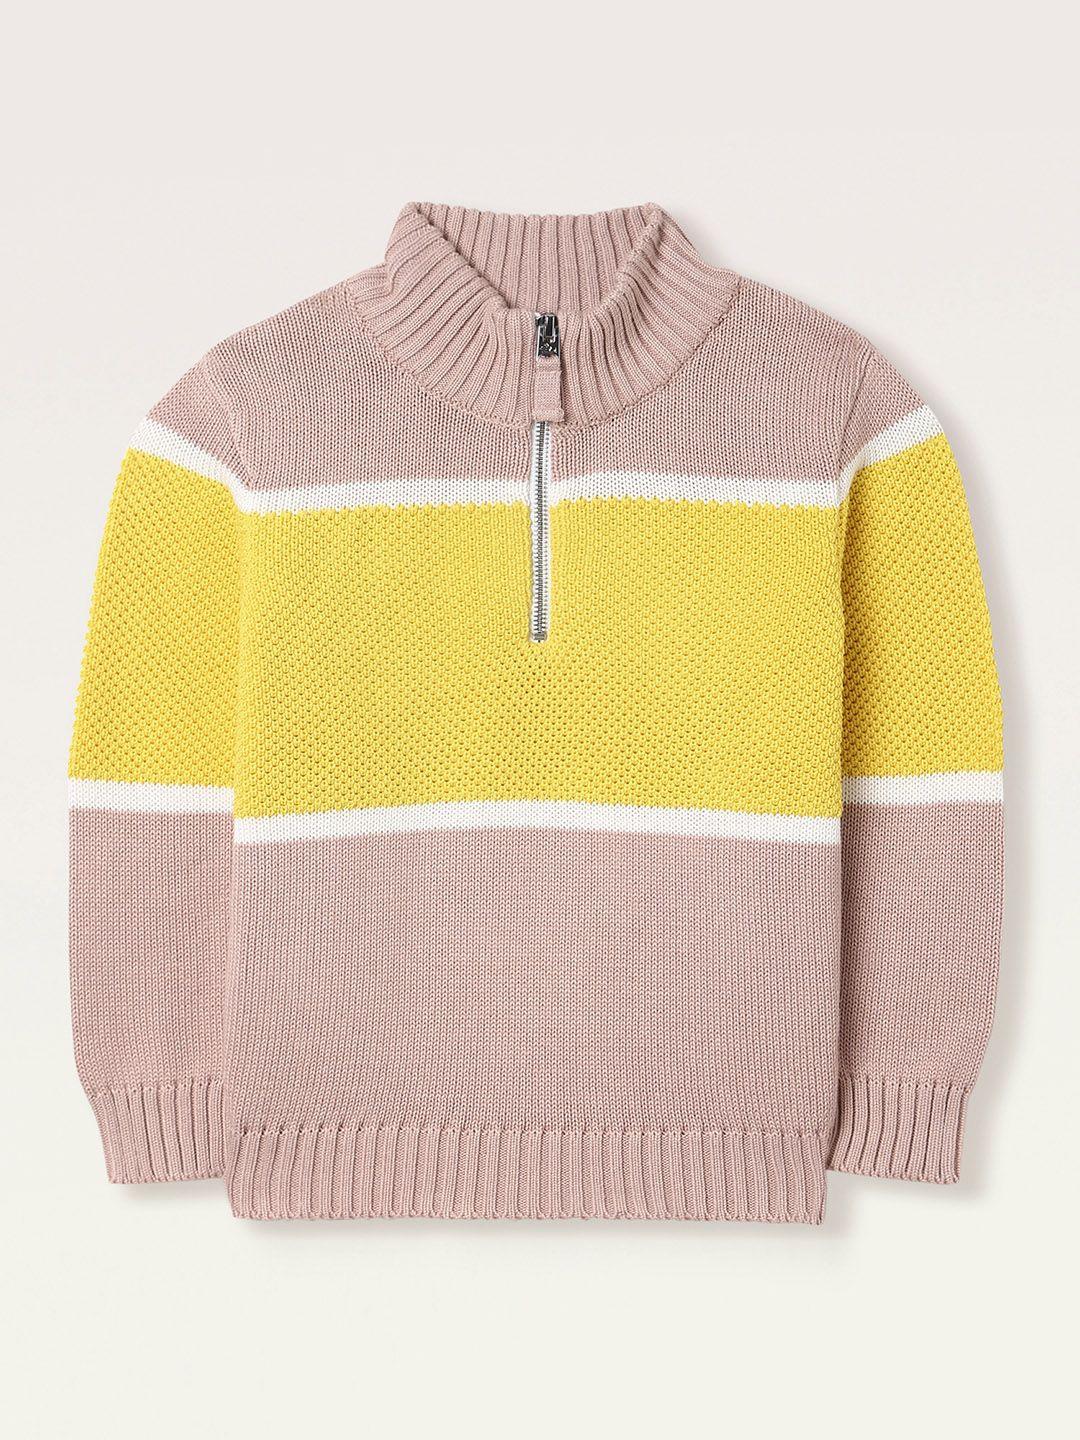 cherry crumble unisex kids pink & yellow colourblocked pullover sweater